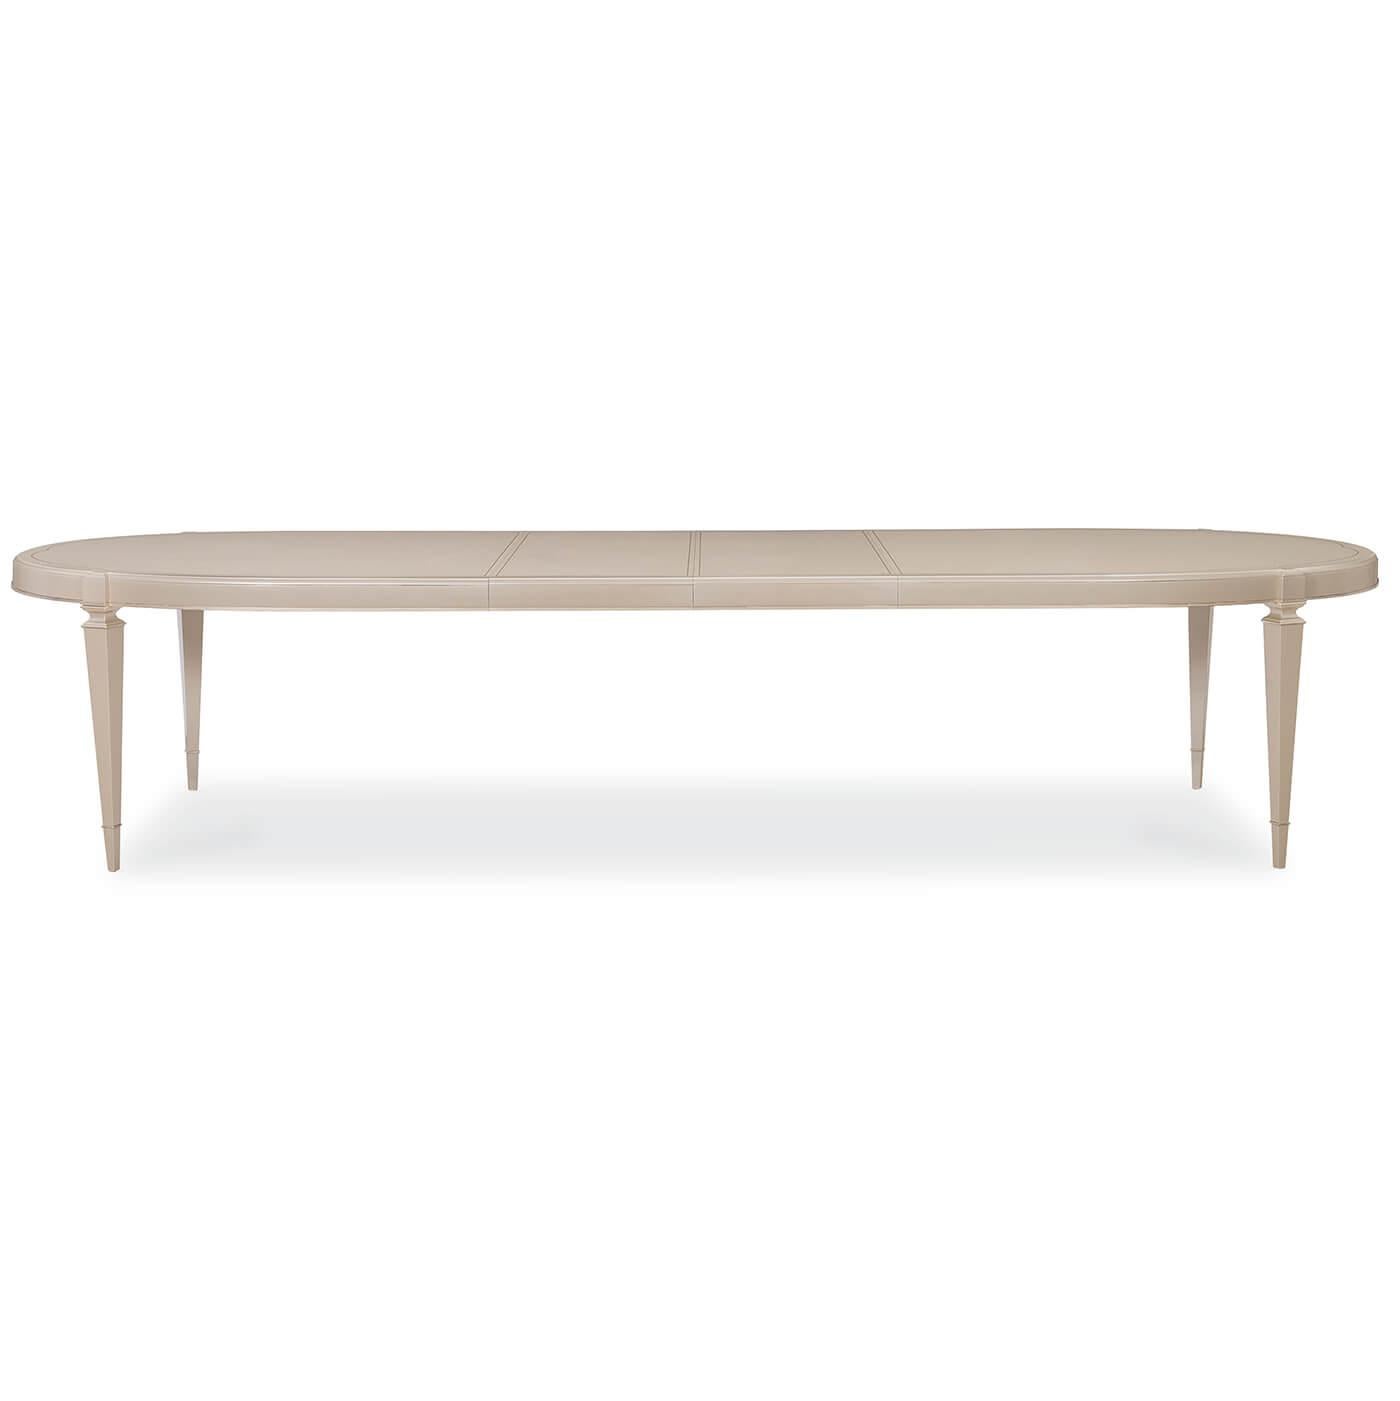 Contemporary European Art Deco Style Extension Dining Table